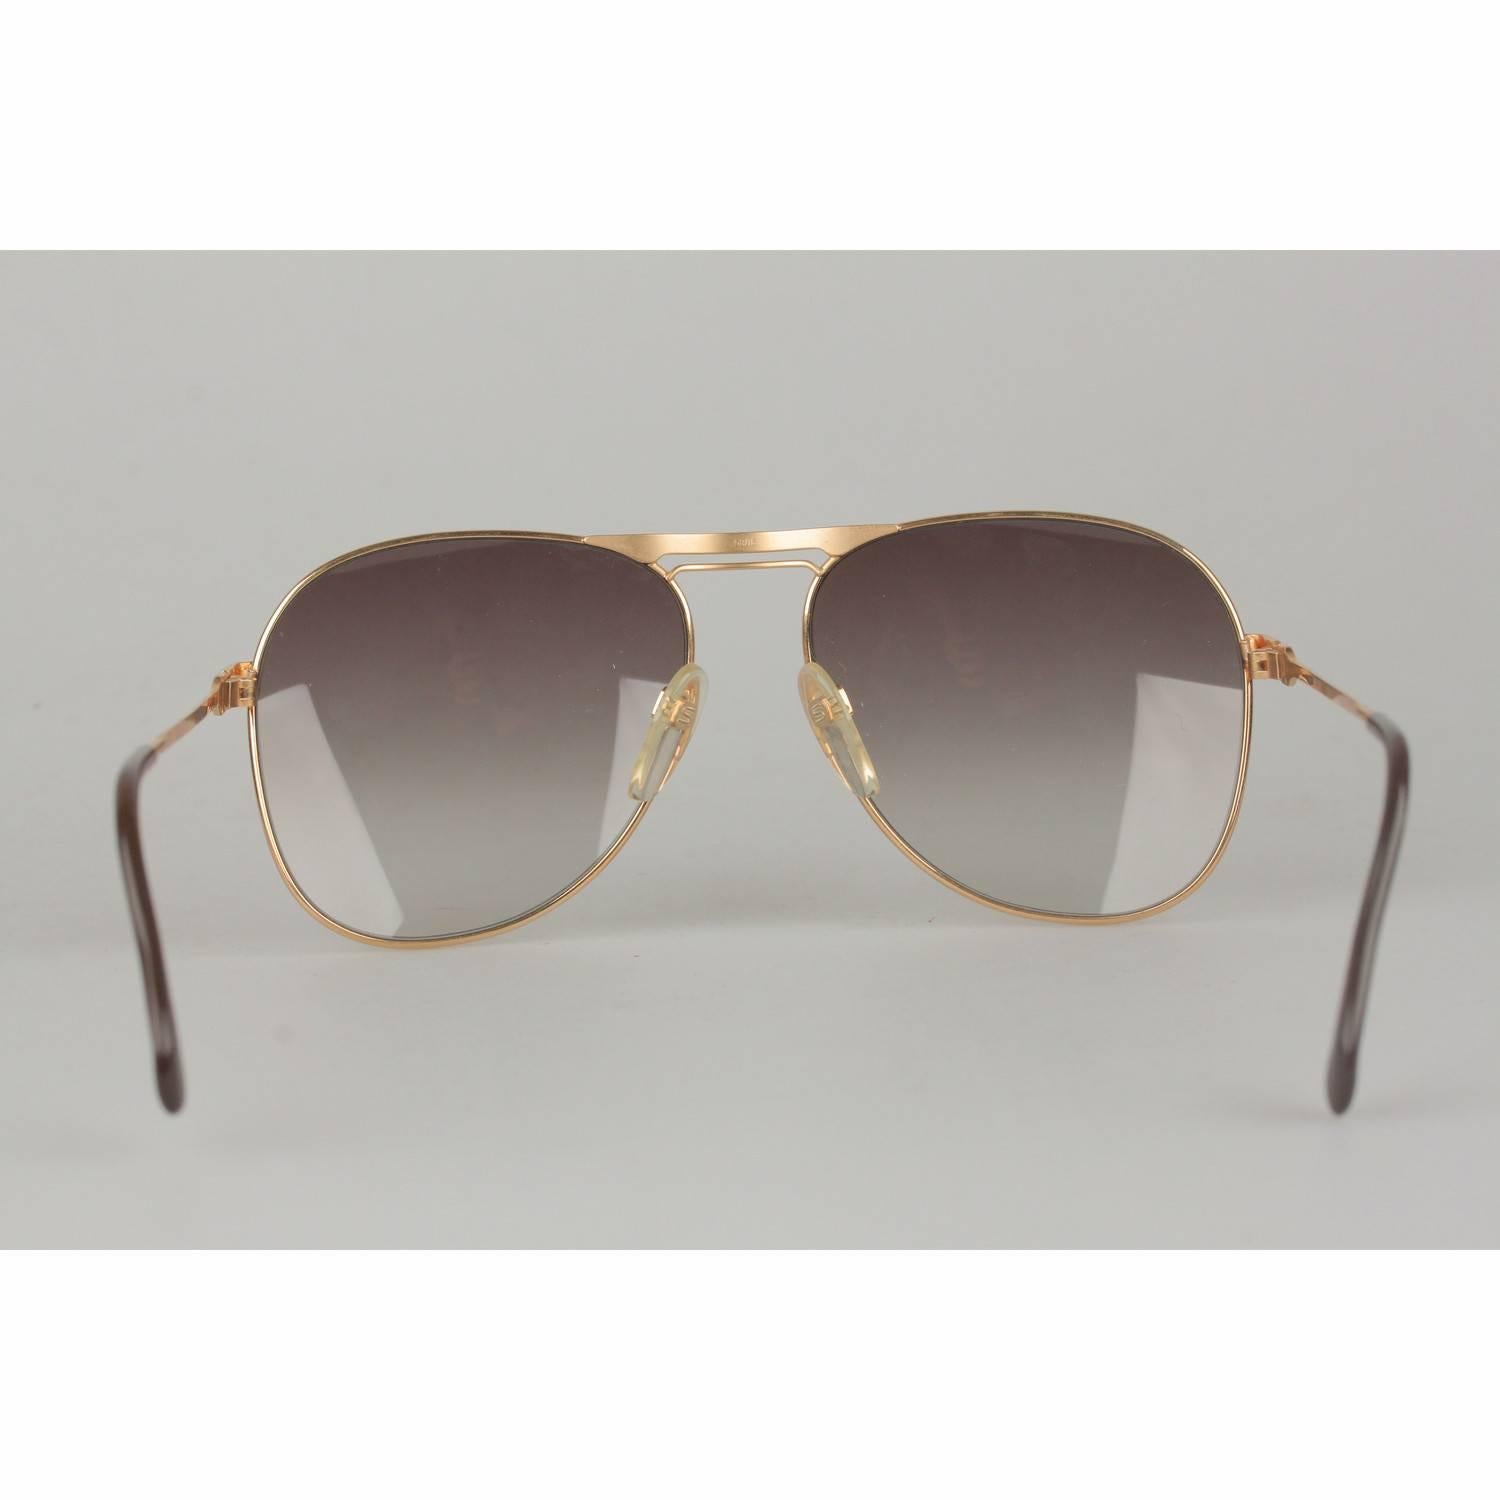 Silhouette Vintage Aviator Gold Metal Sunglasses M7019 58/16 135 mm In Excellent Condition For Sale In Rome, Rome